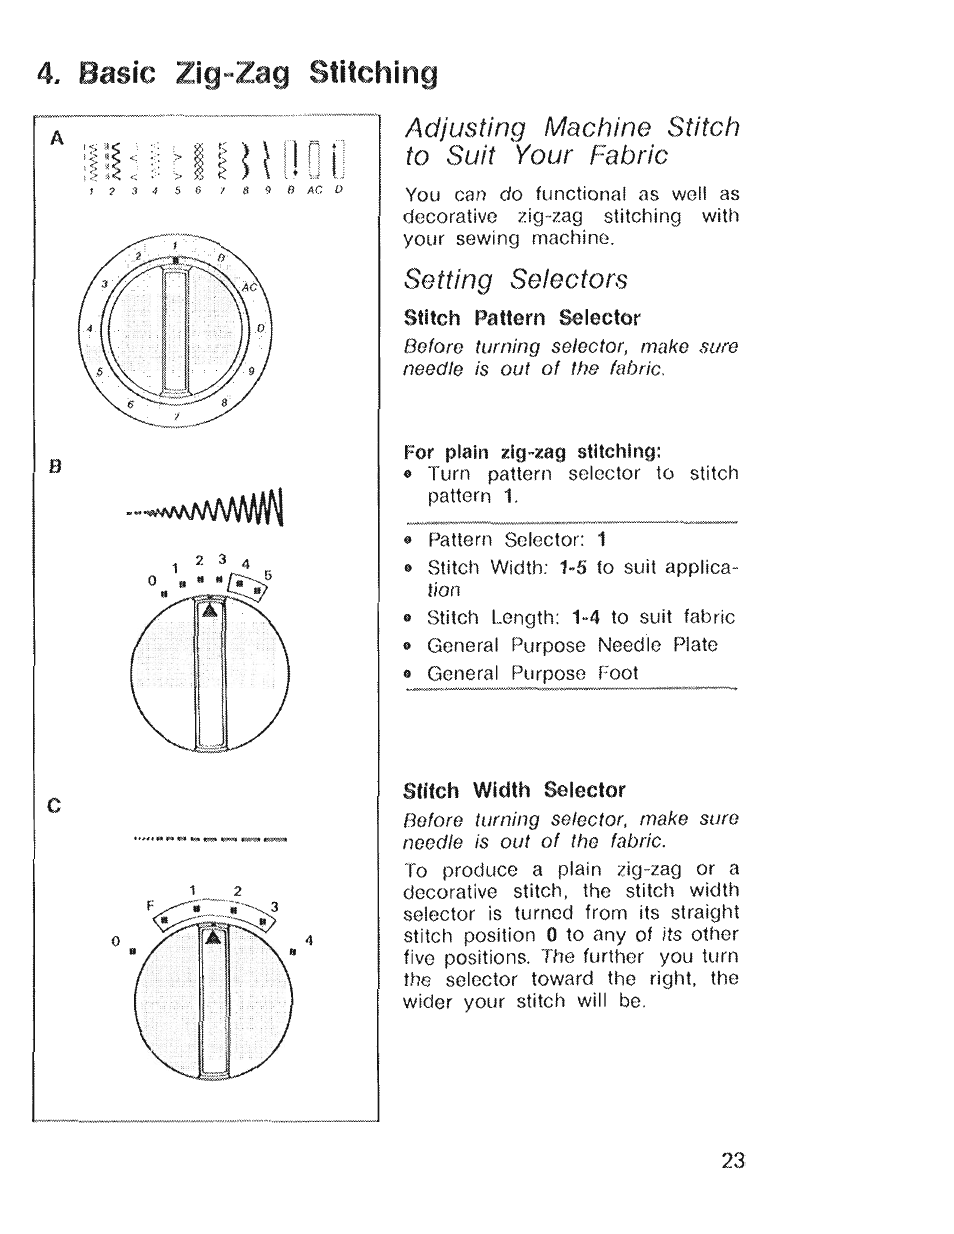 Basic zig-zag stitching, H!co, Adjusting machine stitch to suit your fabric | Setting selectors, Stitch pattern selector, Stitch width selector, H ! c o | SINGER 4022 User Manual | Page 25 / 56